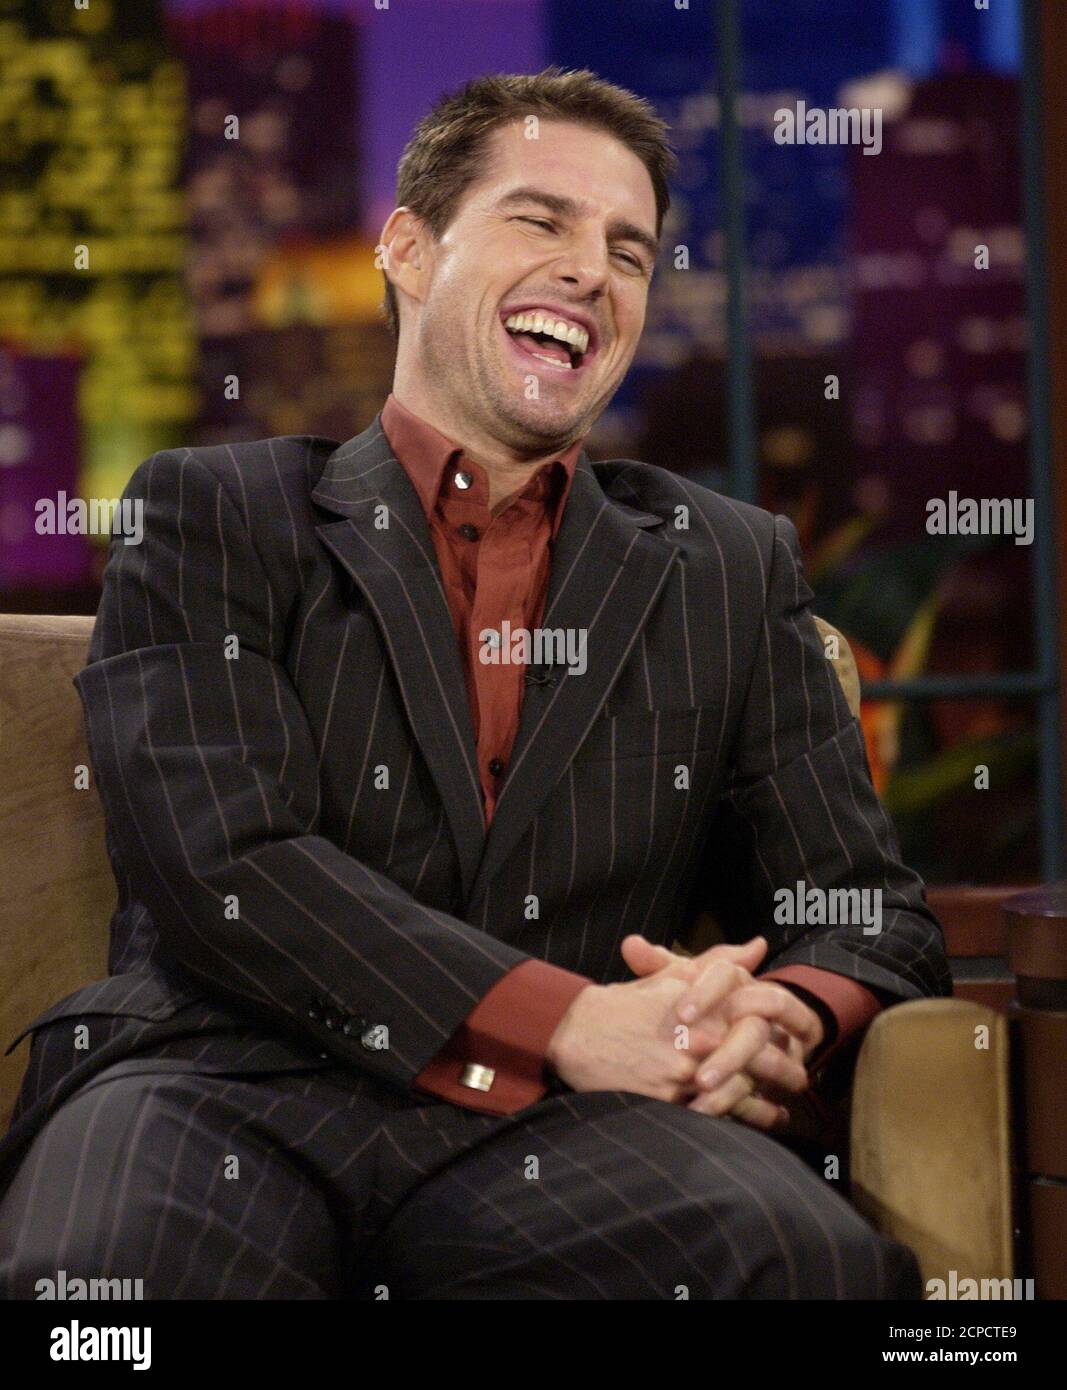 Actor Tom Cruise appears on 'The Tonight Show with Jay Leno,' at NBC's studios in Burbank, California August 9, 2004. Crime may not pay for Tom Cruise. The box office superhero's first outing as a villain, in director Michael Mann's thriller 'Collateral,' made off with a middling $24.4 million during its first three days at the North American box office, according to studio estimates issued on August 8, 2004. It represents the second-smallest No. 1 debut for the summer of 2004. Cruise portrays contract killer Vincent in the movie. REUTERS/Jim Ruymen  JR Stock Photo